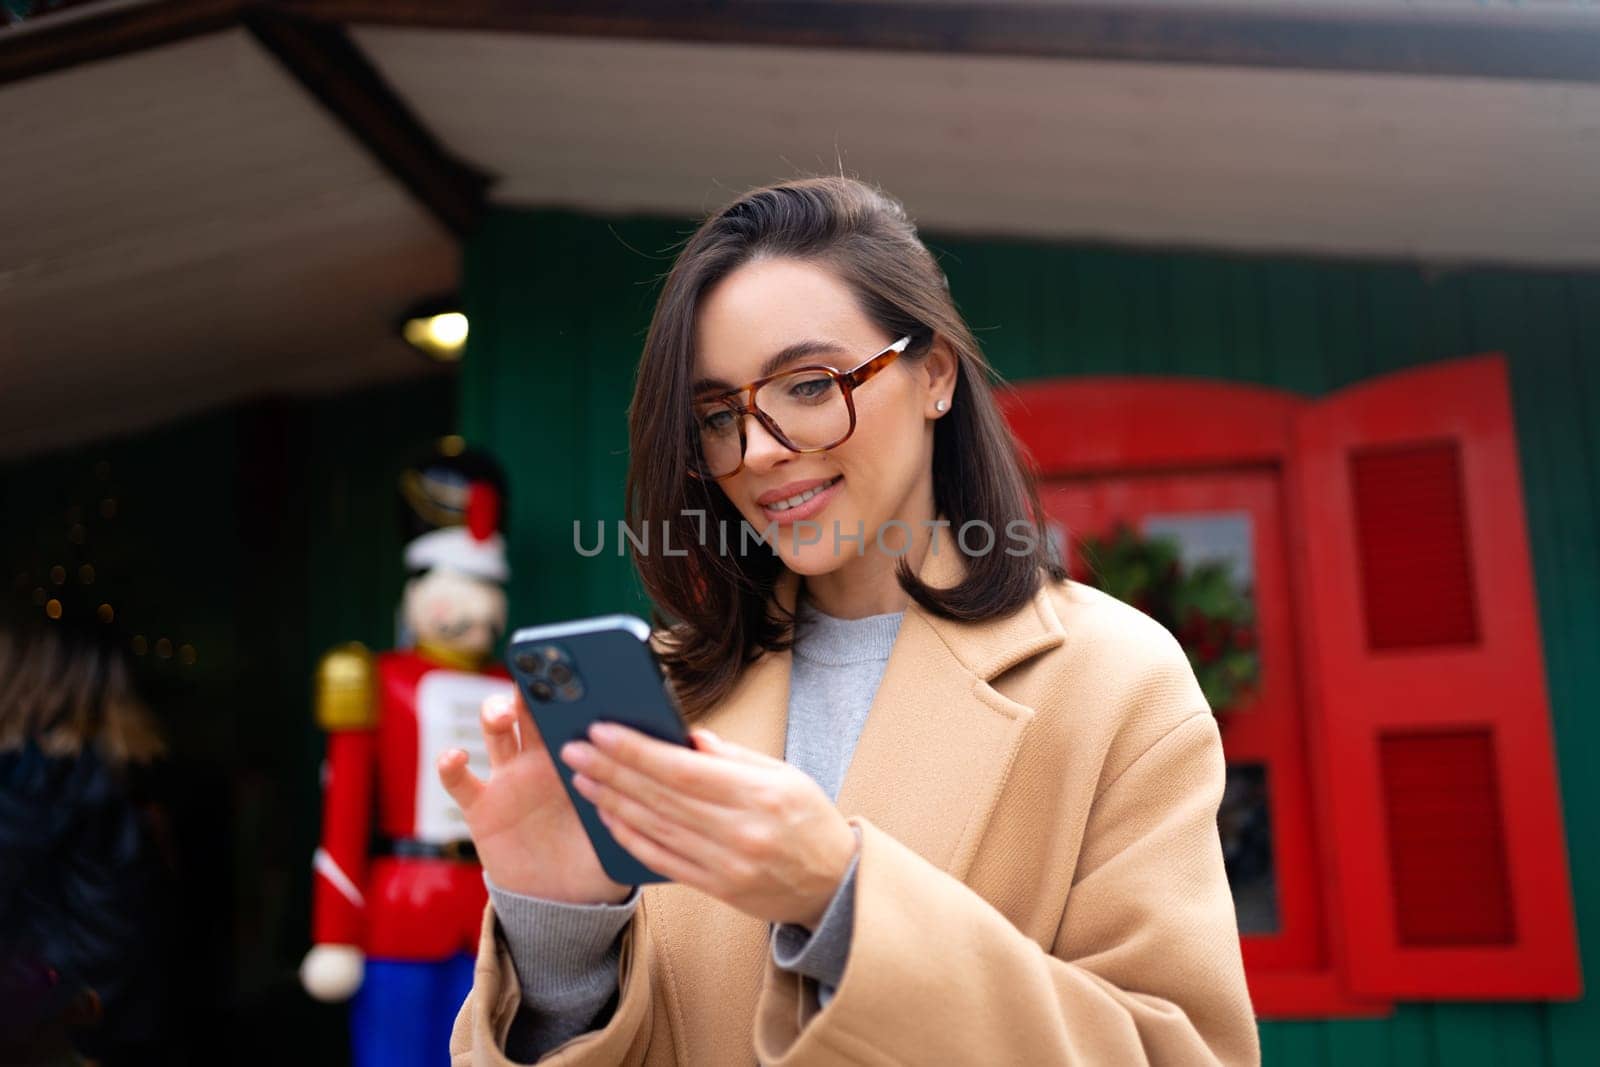 Woman on street in coat and glasses smiles while looking at phone by andreonegin